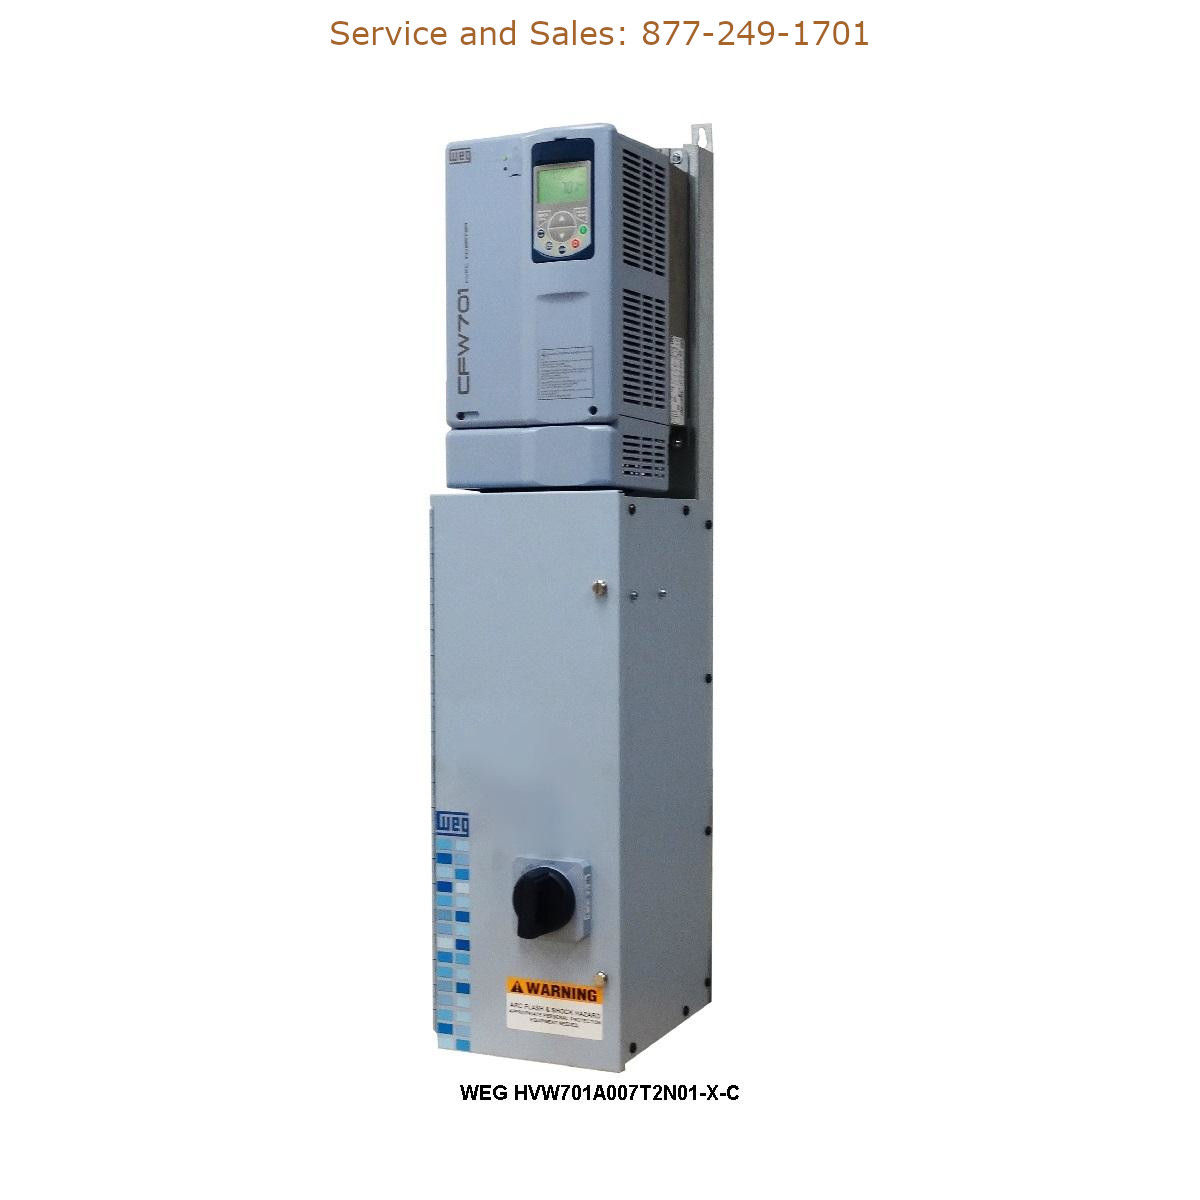 WEG HVW701A007T2N01-X-C WEG Model Number HVW701A007T2N01-X-C WEG Drives, Variable Speed Drives Repair Service, Troubleshooting, Replacement Parts https://gesrepair.com/wp-content/uploads/2022/WEG/WEG_HVW701A007T2N01-X-C_Drives_Variable_Speed_Drives.jpg